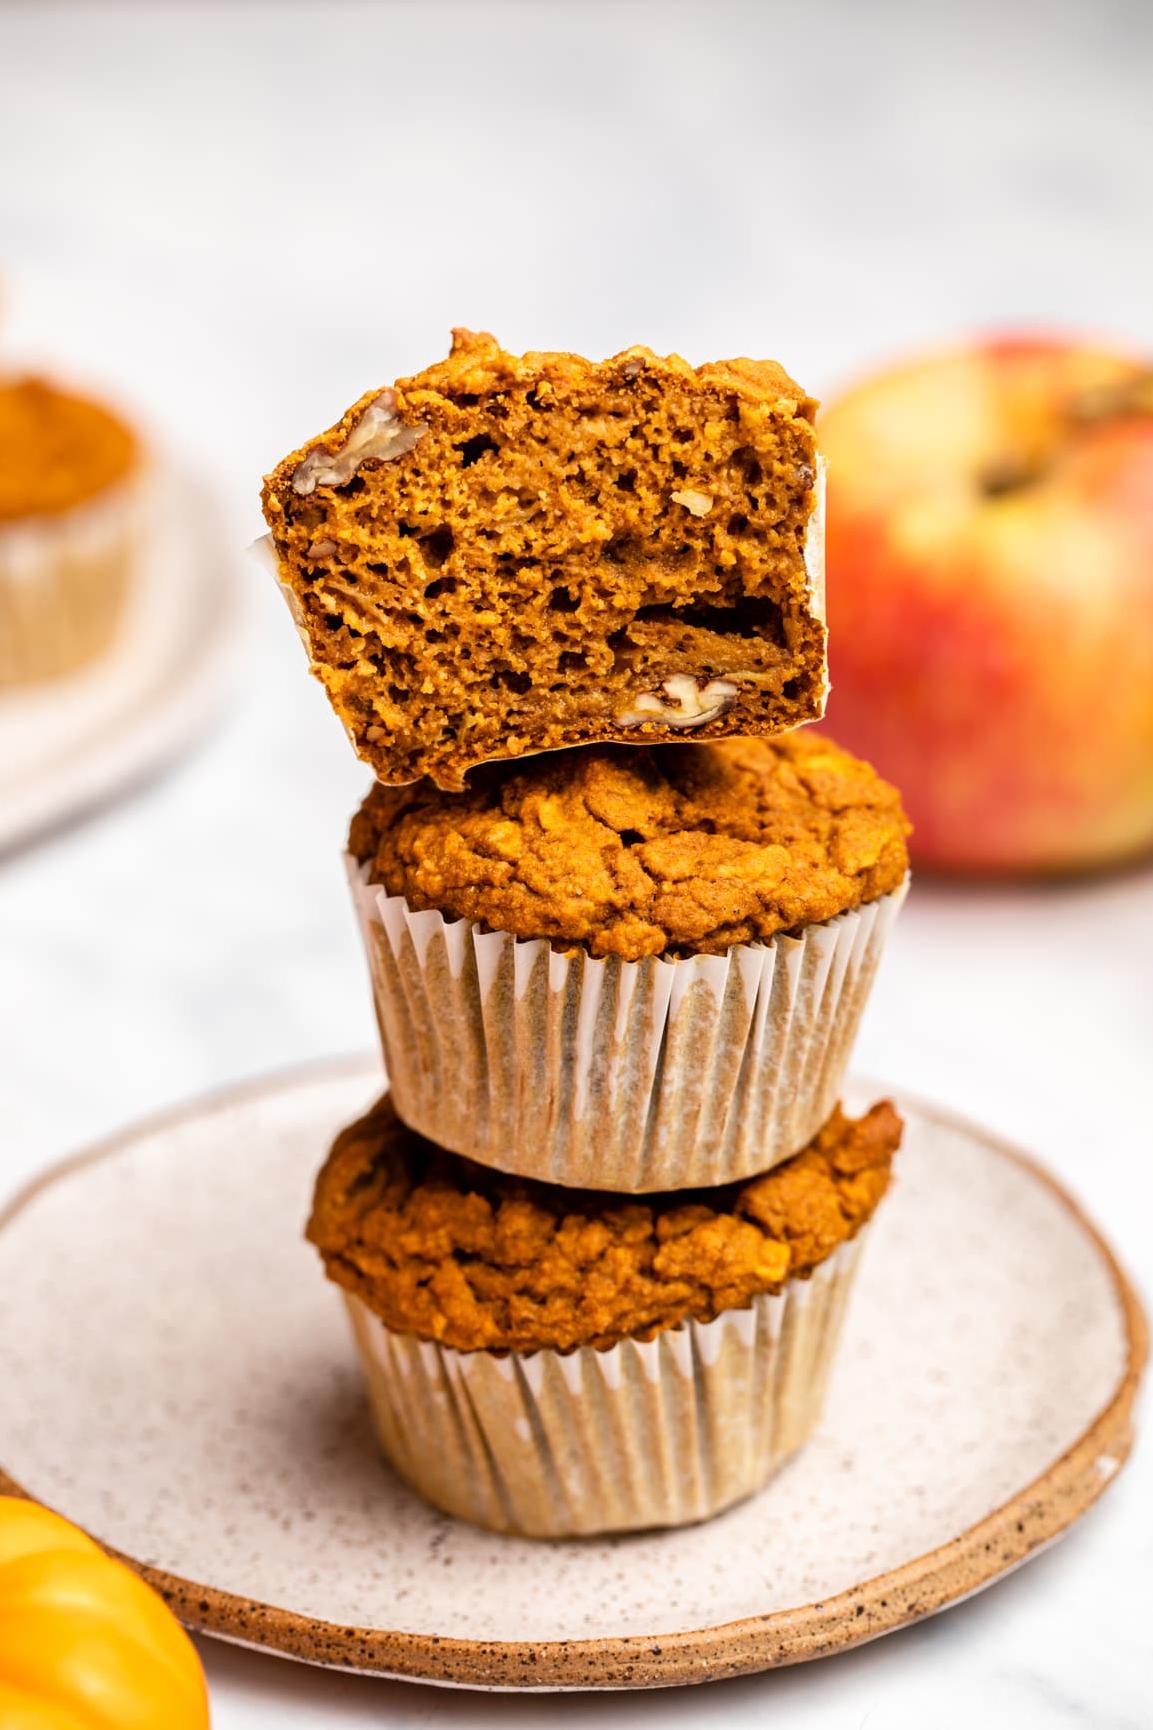  Get ready to indulge in the autumnal flavors of pumpkin and apple in these muffins!